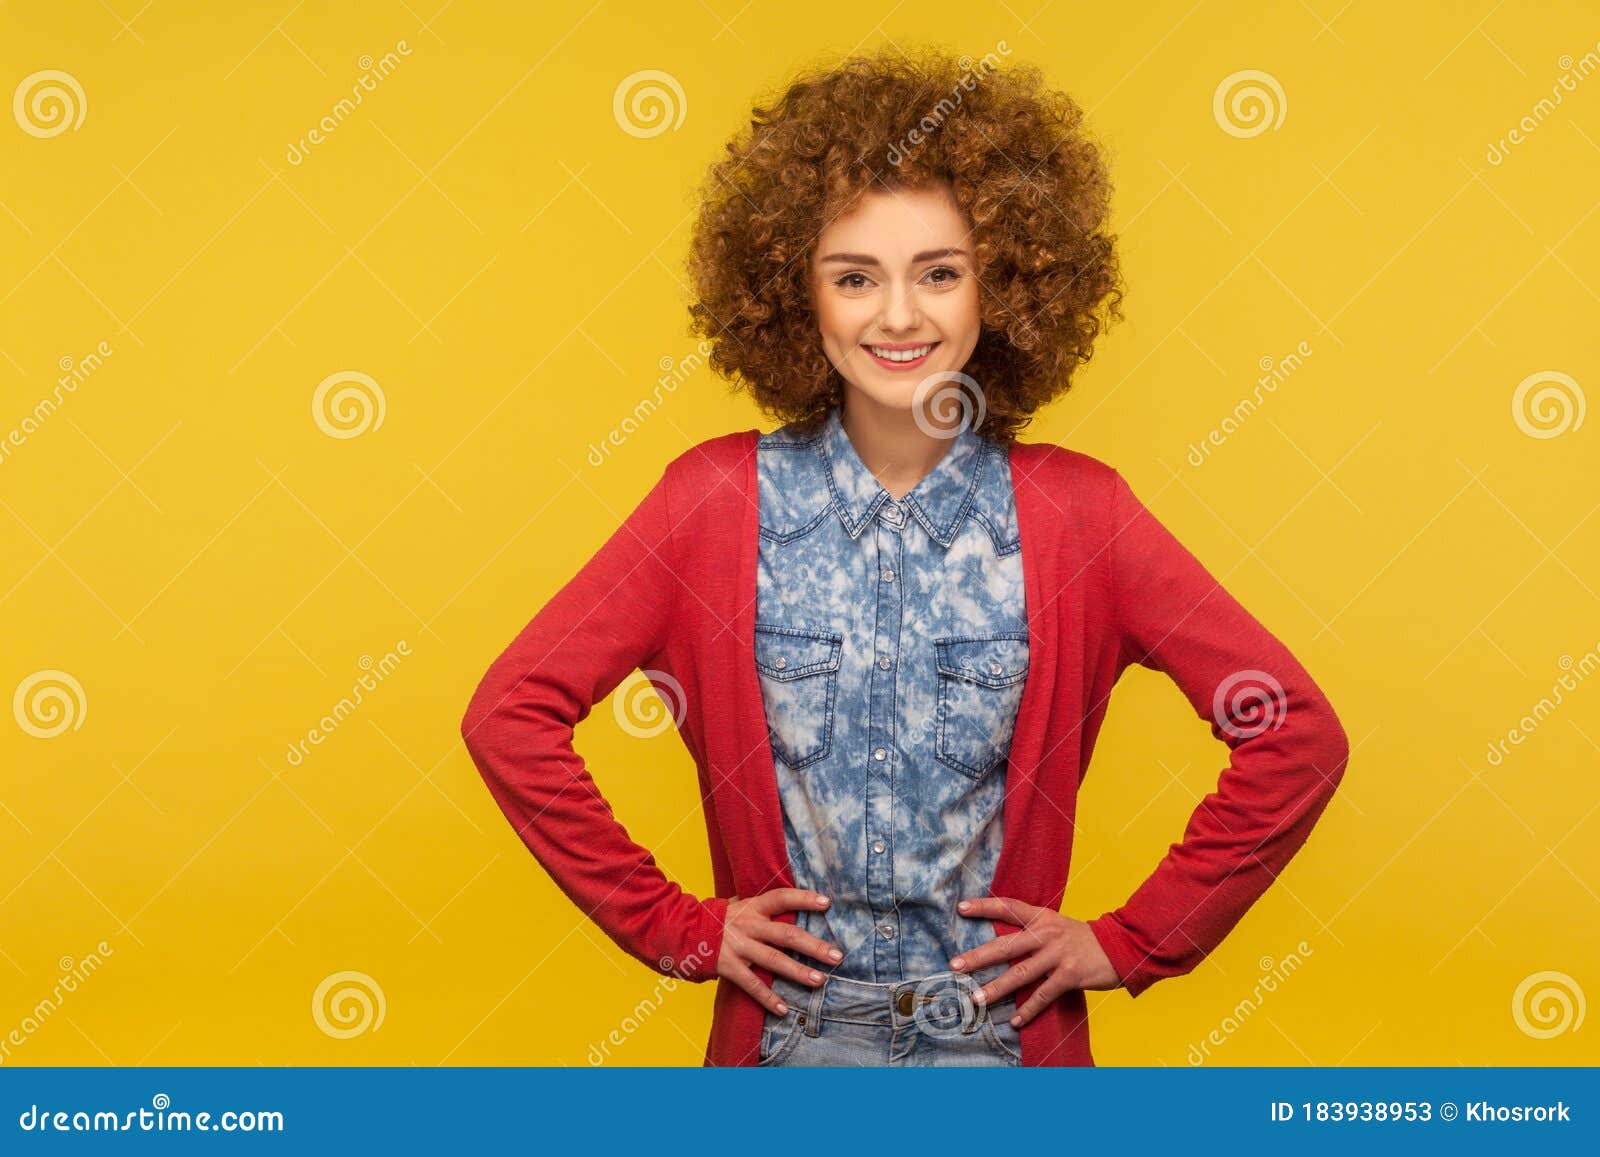 Portrait Of Positive Woman With Fluffy Curly Hair In Casual Style Jeans ...